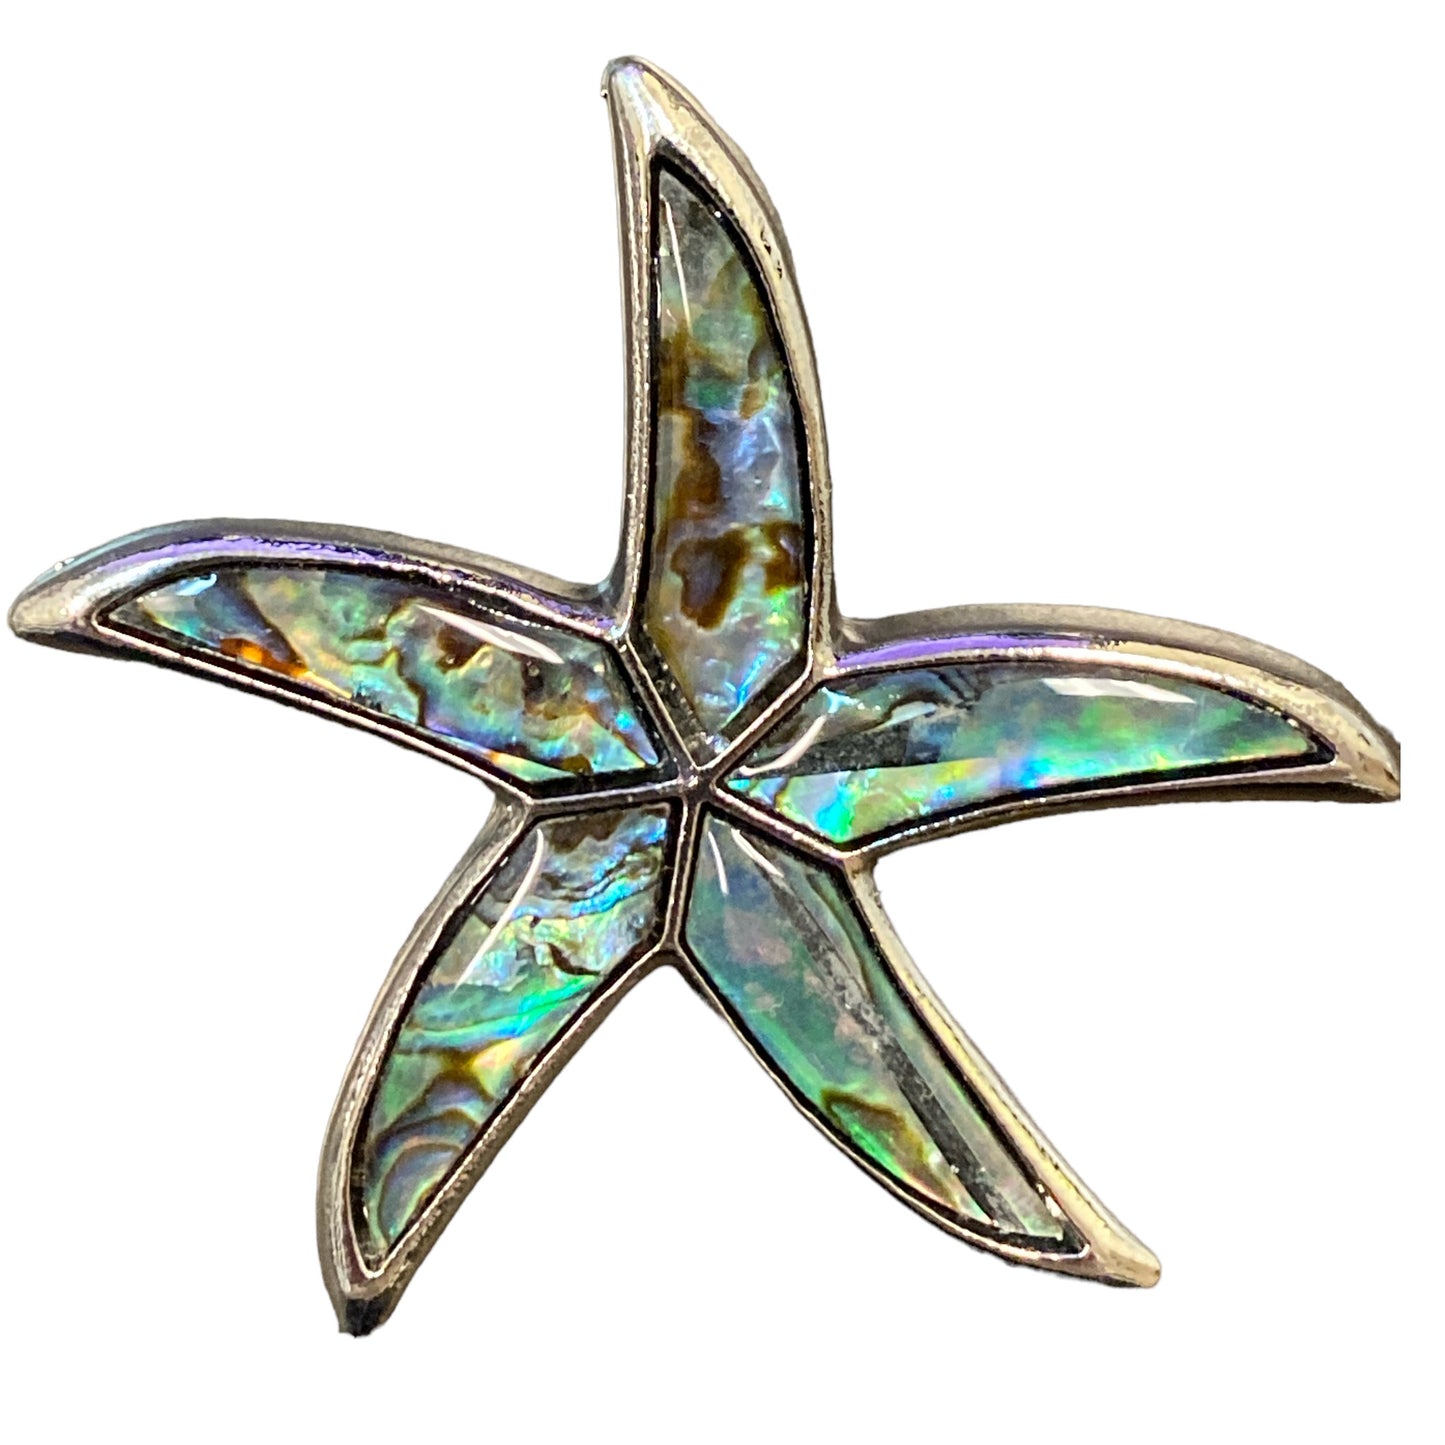 Starfish Design Brooch with Abalone Shell inlay - Silver Color Plated Metal - 55x45mm - China - NEW1022